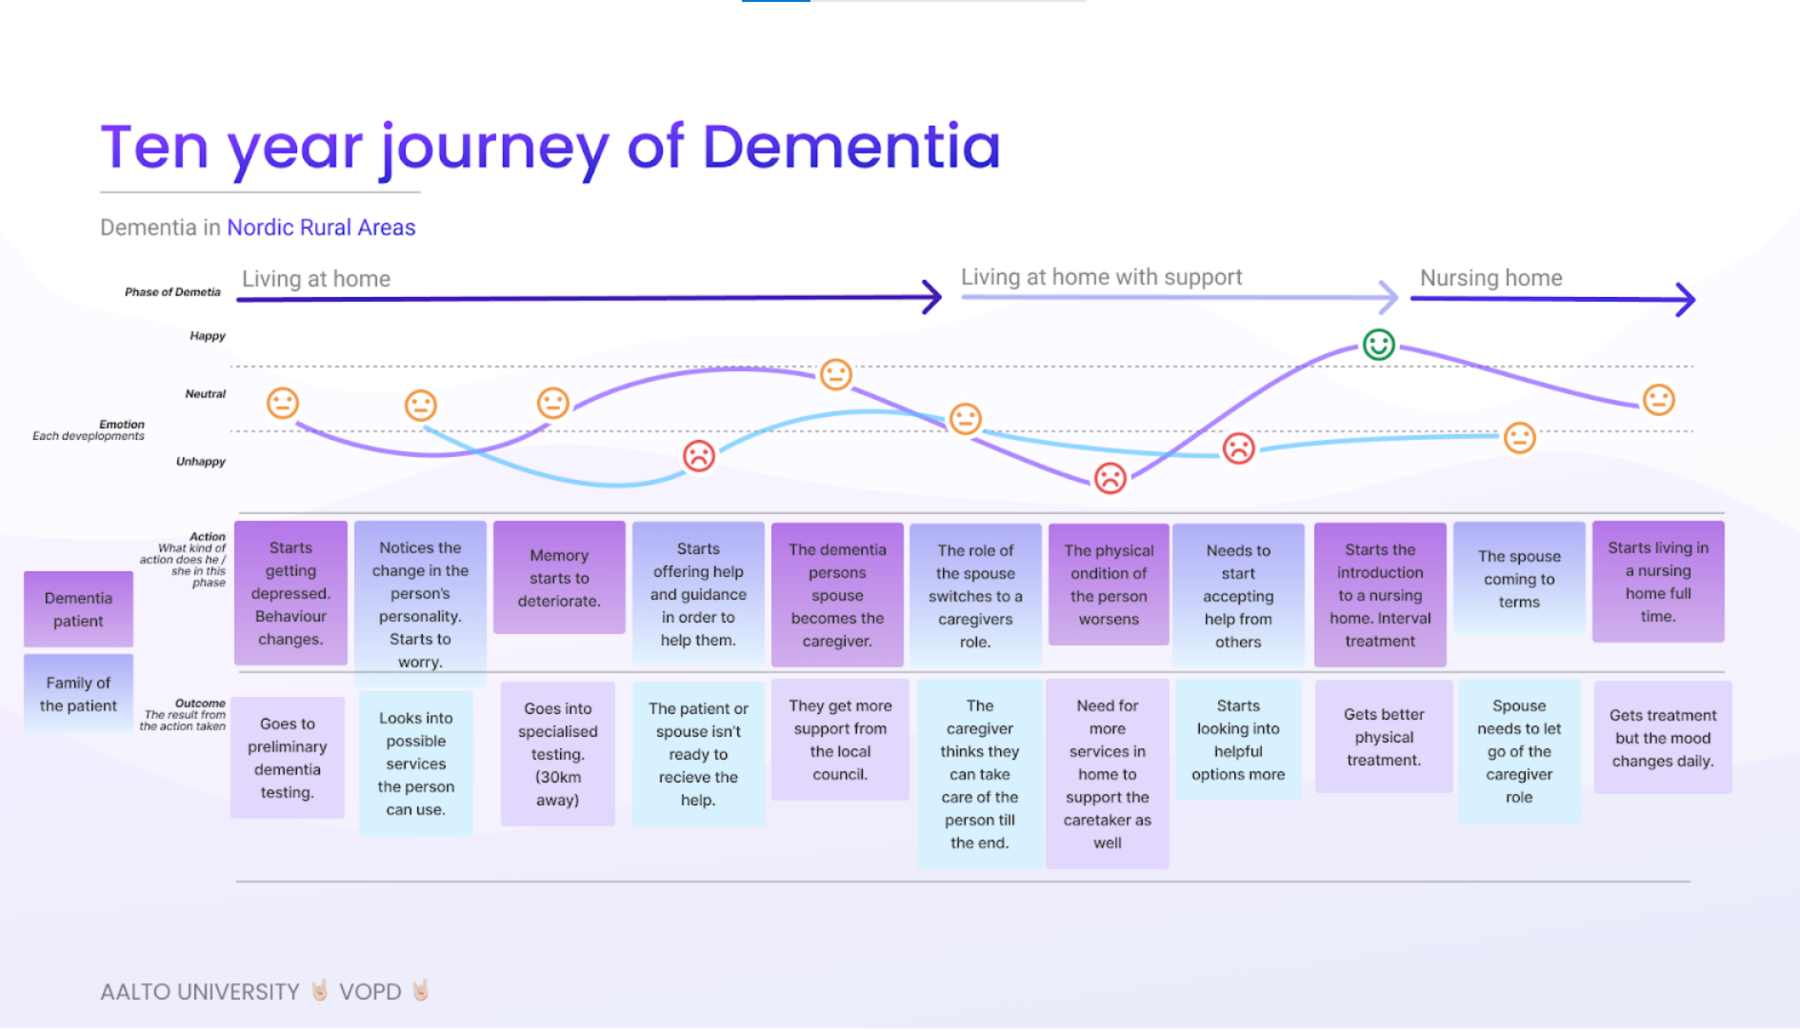 After our interview with a family member who has taken care of their relative who suffers from dementia, we created a 10 year journey that illustrates the journey the family member and dementia patient goes through after the early diagnosis.